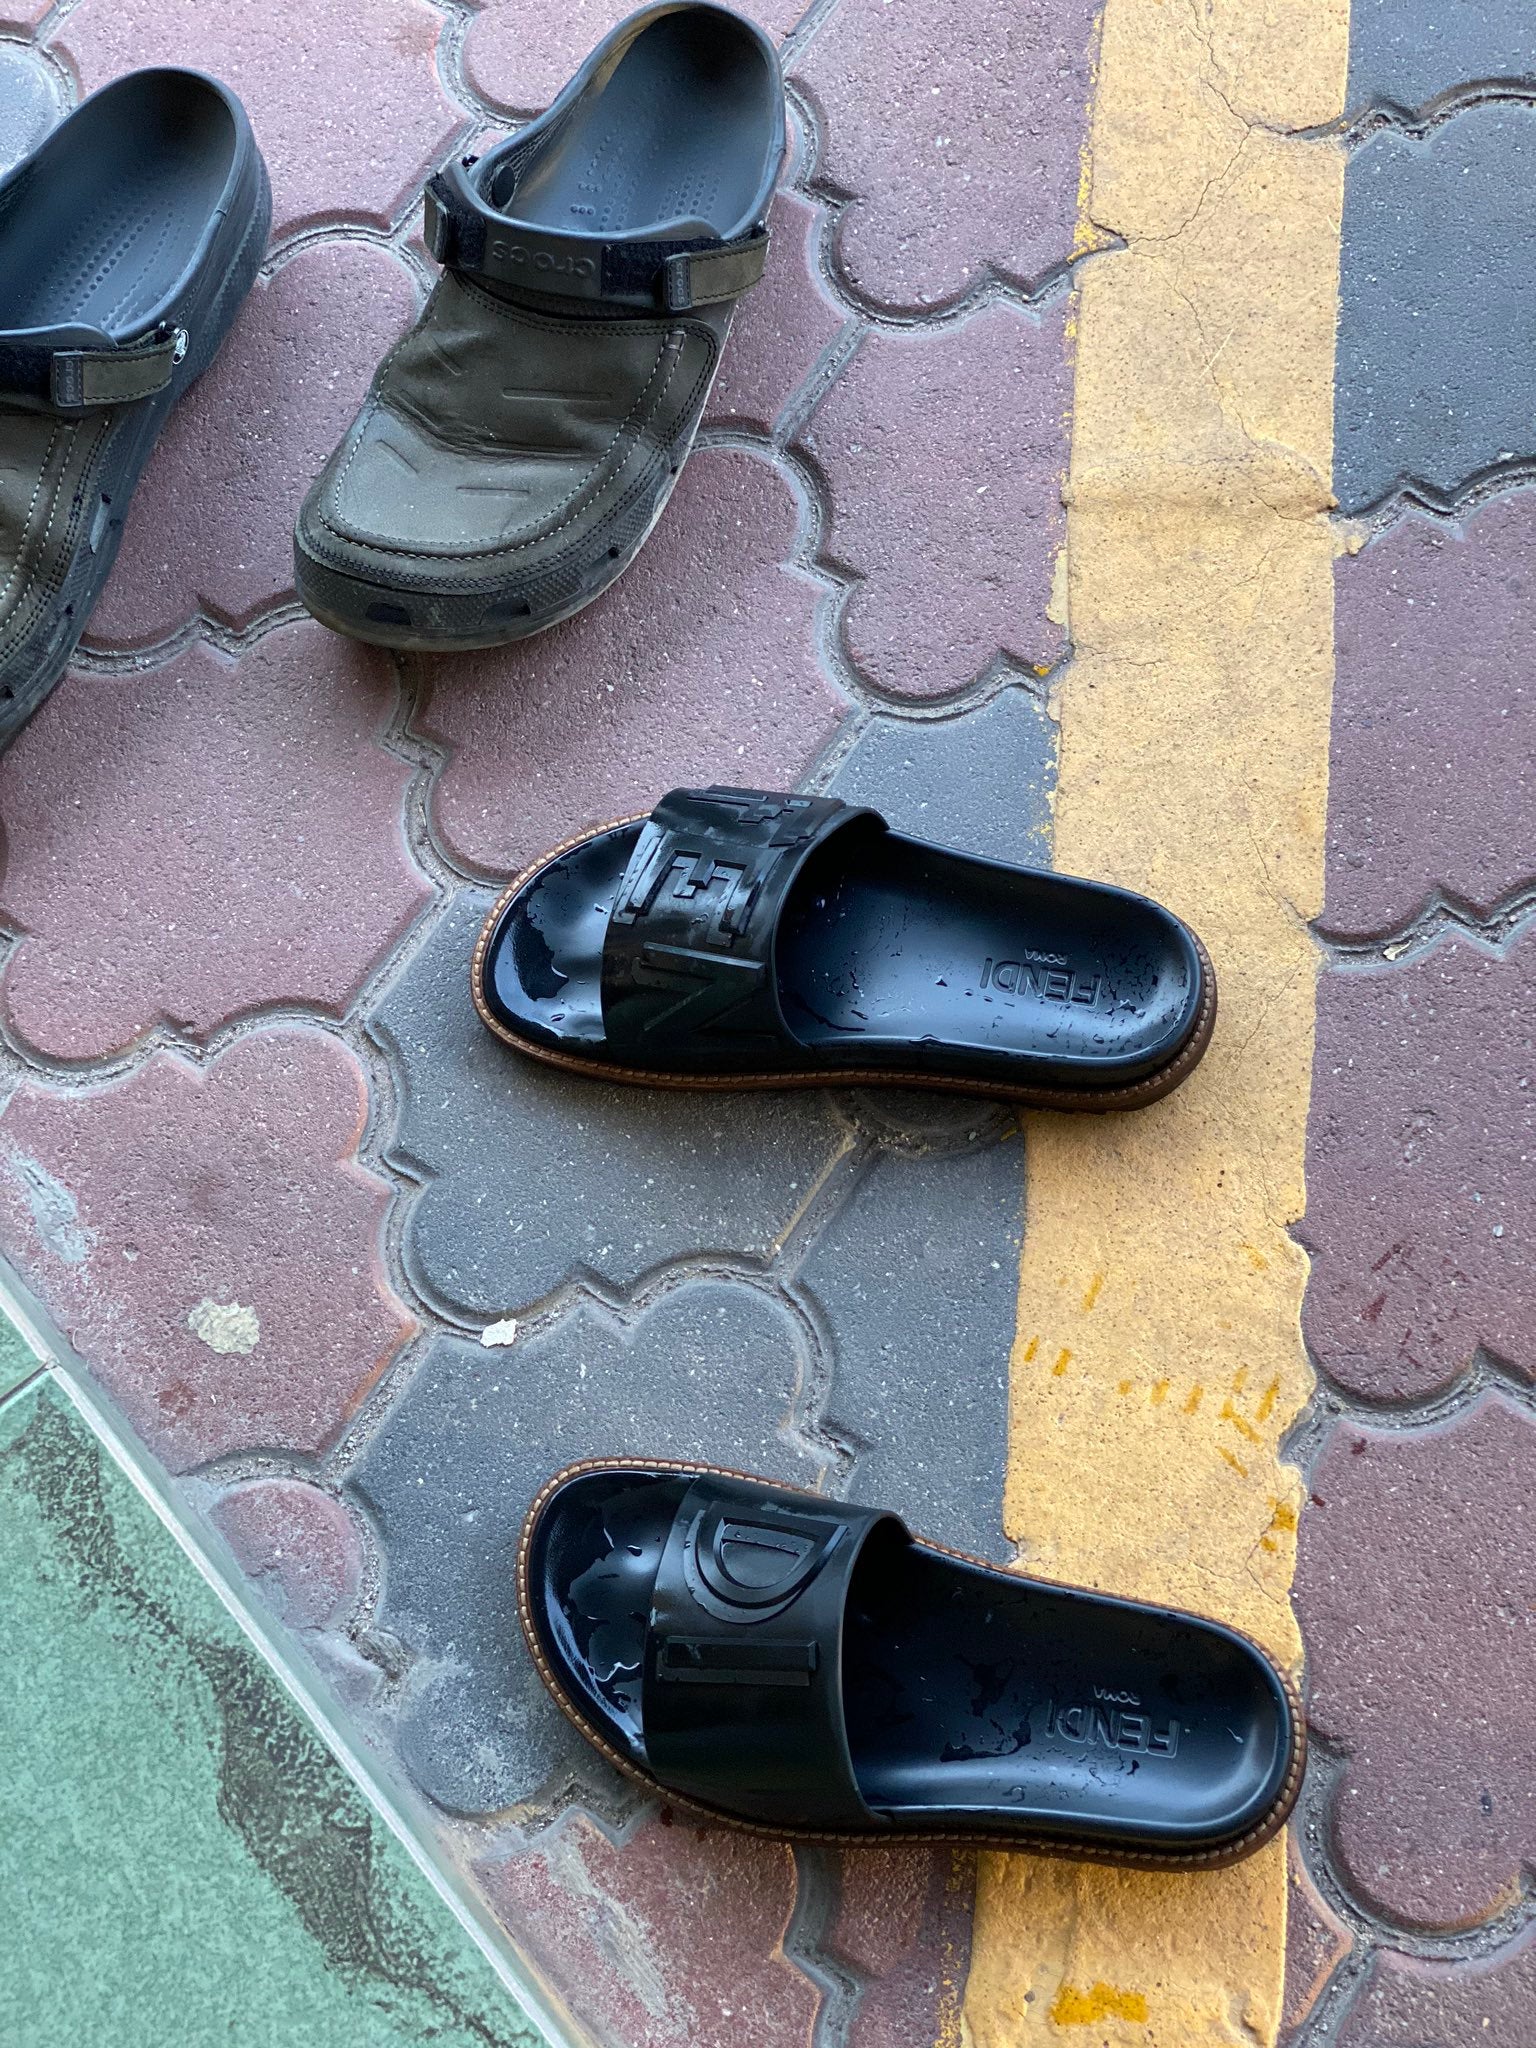 M'sian Man Needed to Pray, Hires Friend To Take Care Of His RM1k+ Fendi Slippers - WORLD OF BUZZ 2